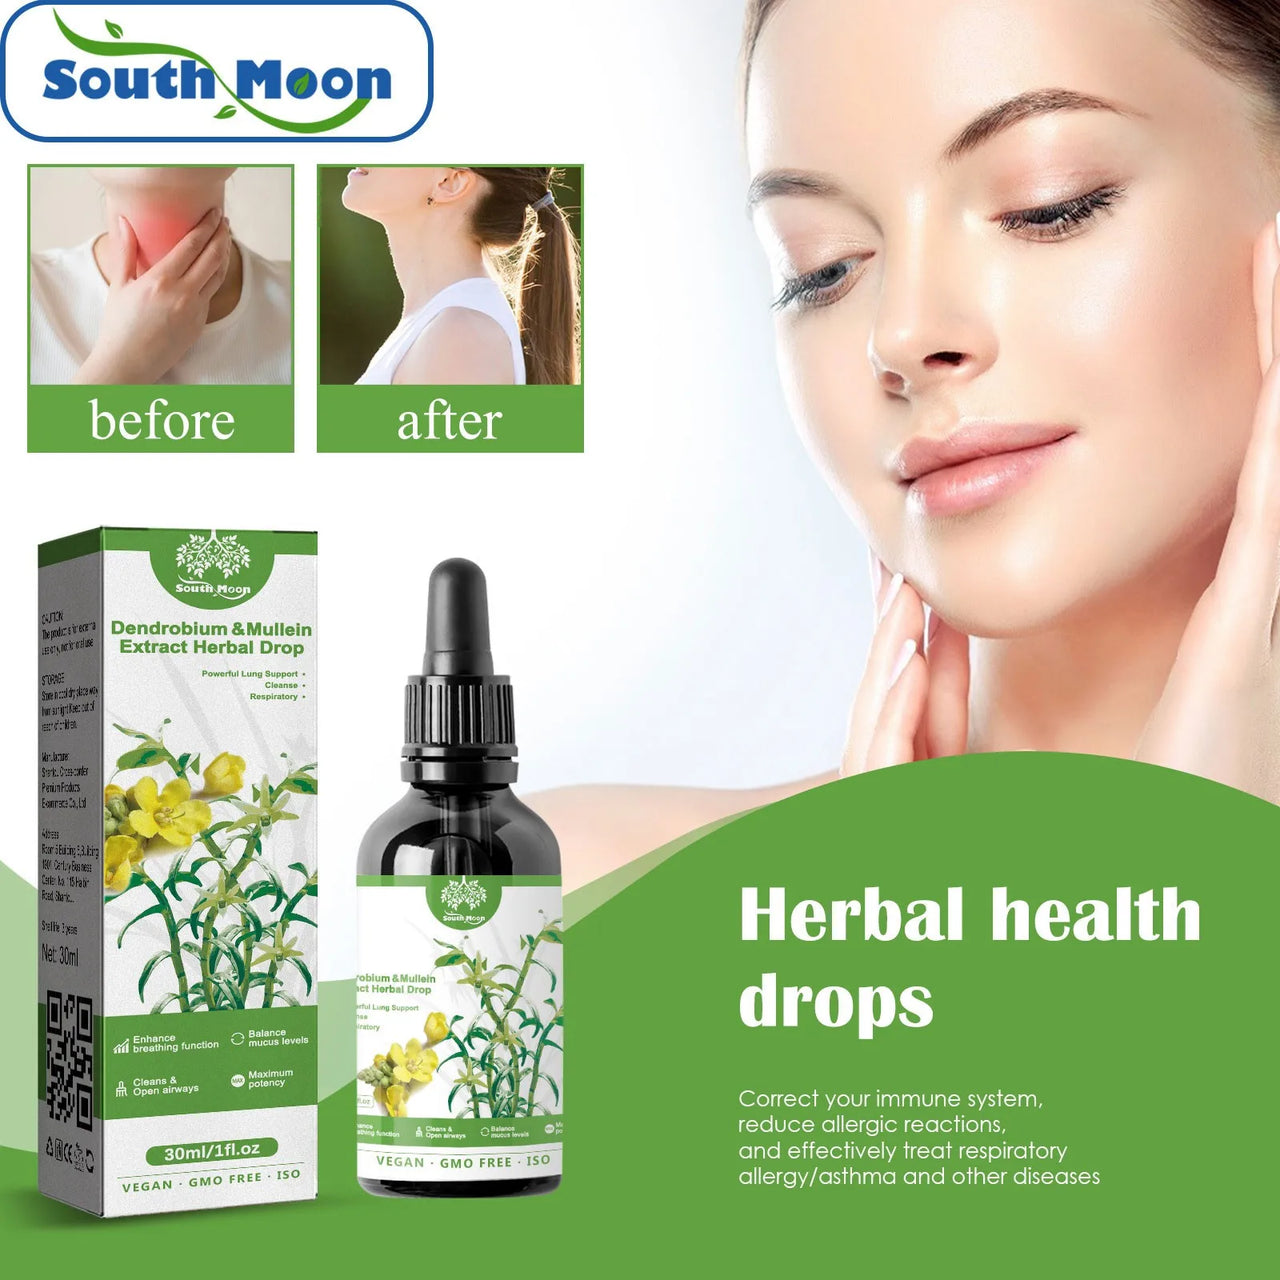 Dendrobium & Mullein Extract Herbal Drops